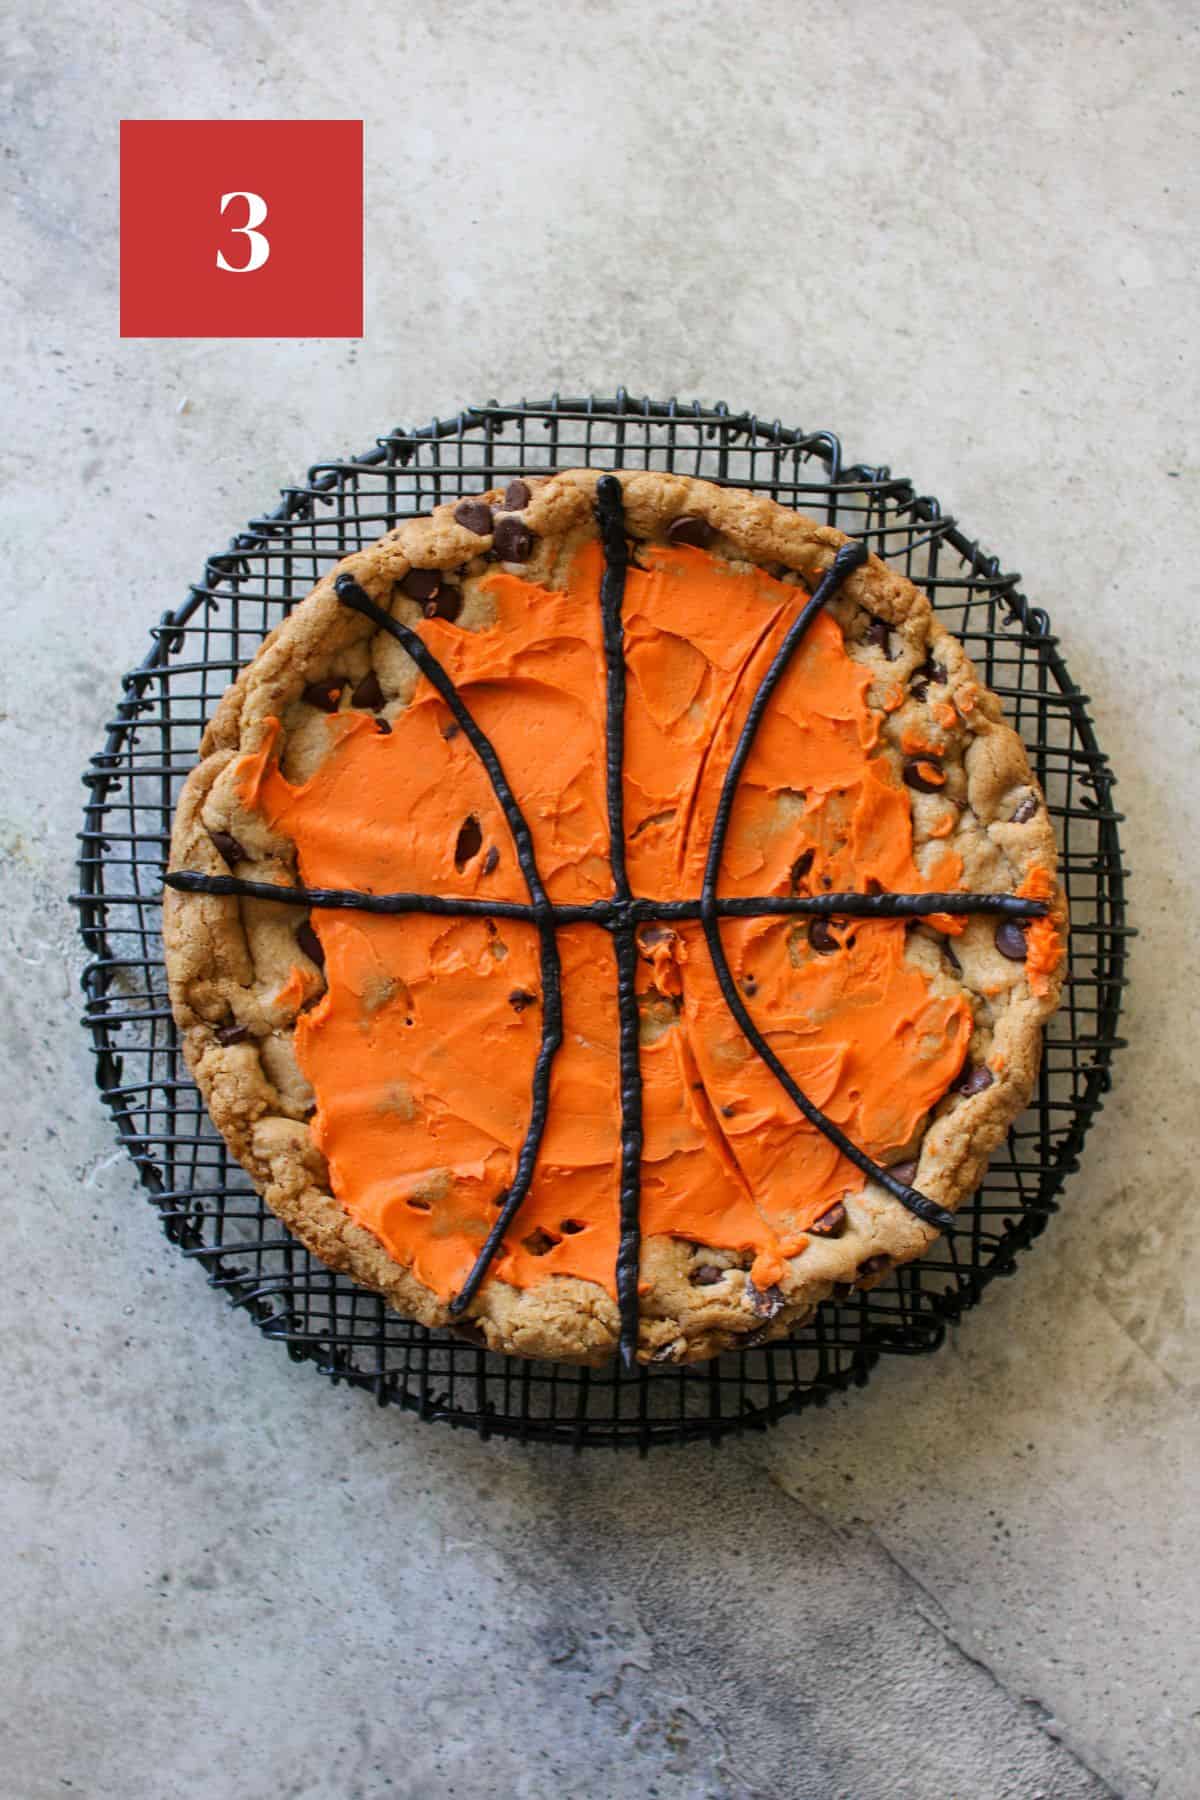 A cookie cake on a black wire trivet on cement background. The cookie cake has a thin layer of orange frosting and basketball lines drawn with a small offset spatula. On top of the orange frosting are thin black basketball lines made of frosting.  In the upper left corner is a dark red square with a white '3' in the center.